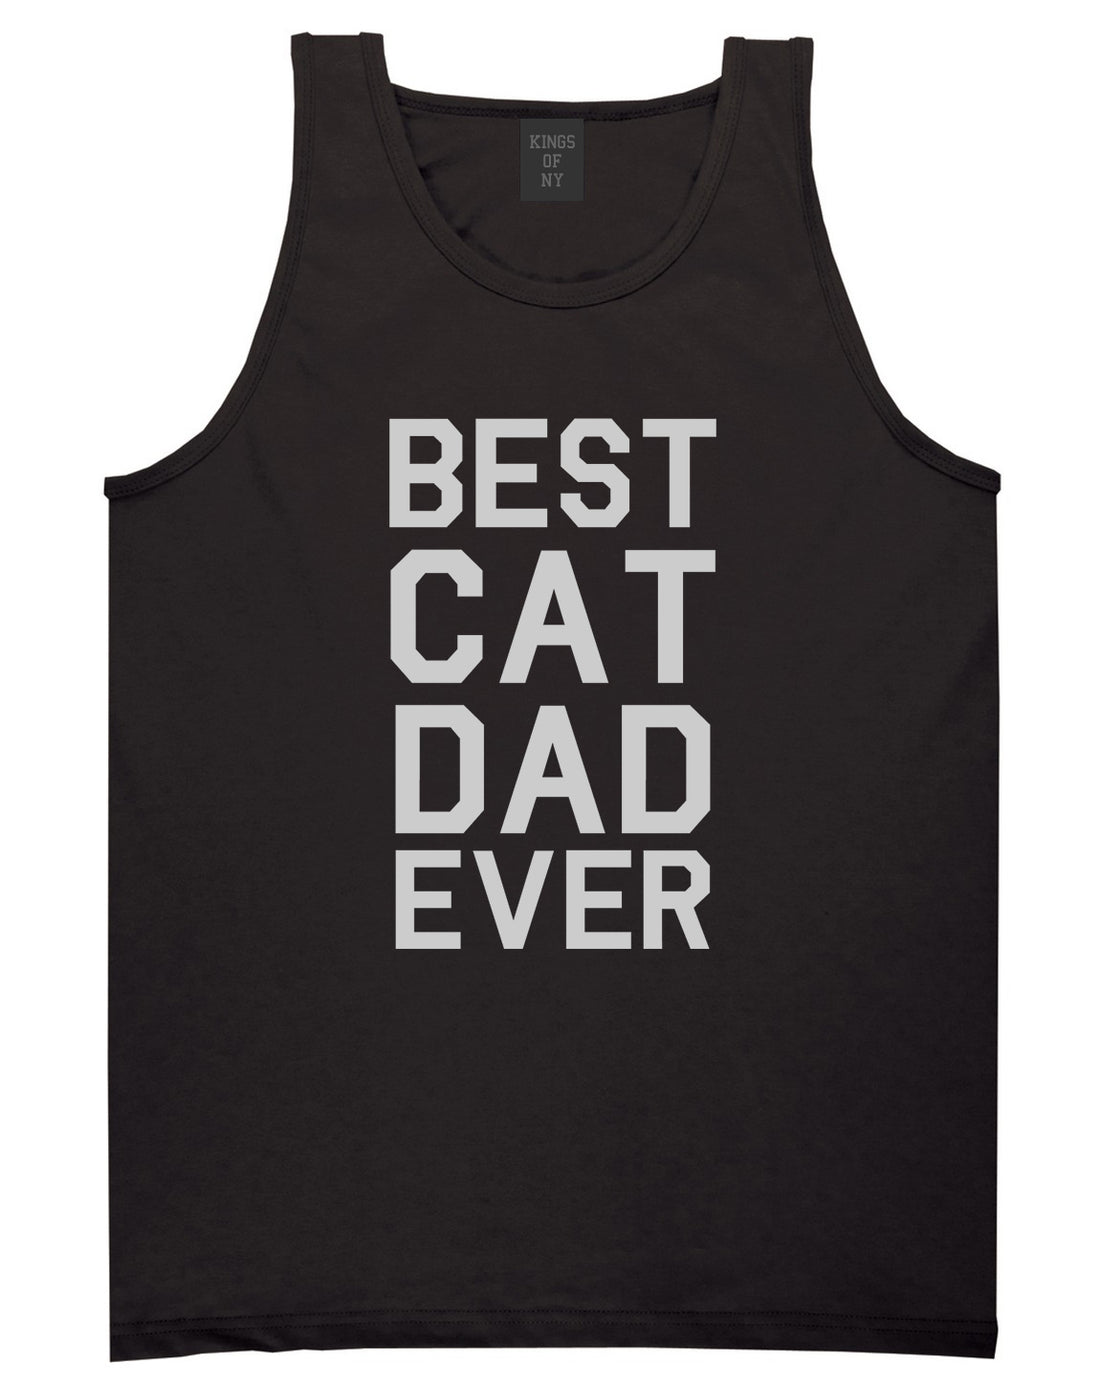 Best_Cat_Dad_Ever Mens Black Tank Top Shirt by Kings Of NY